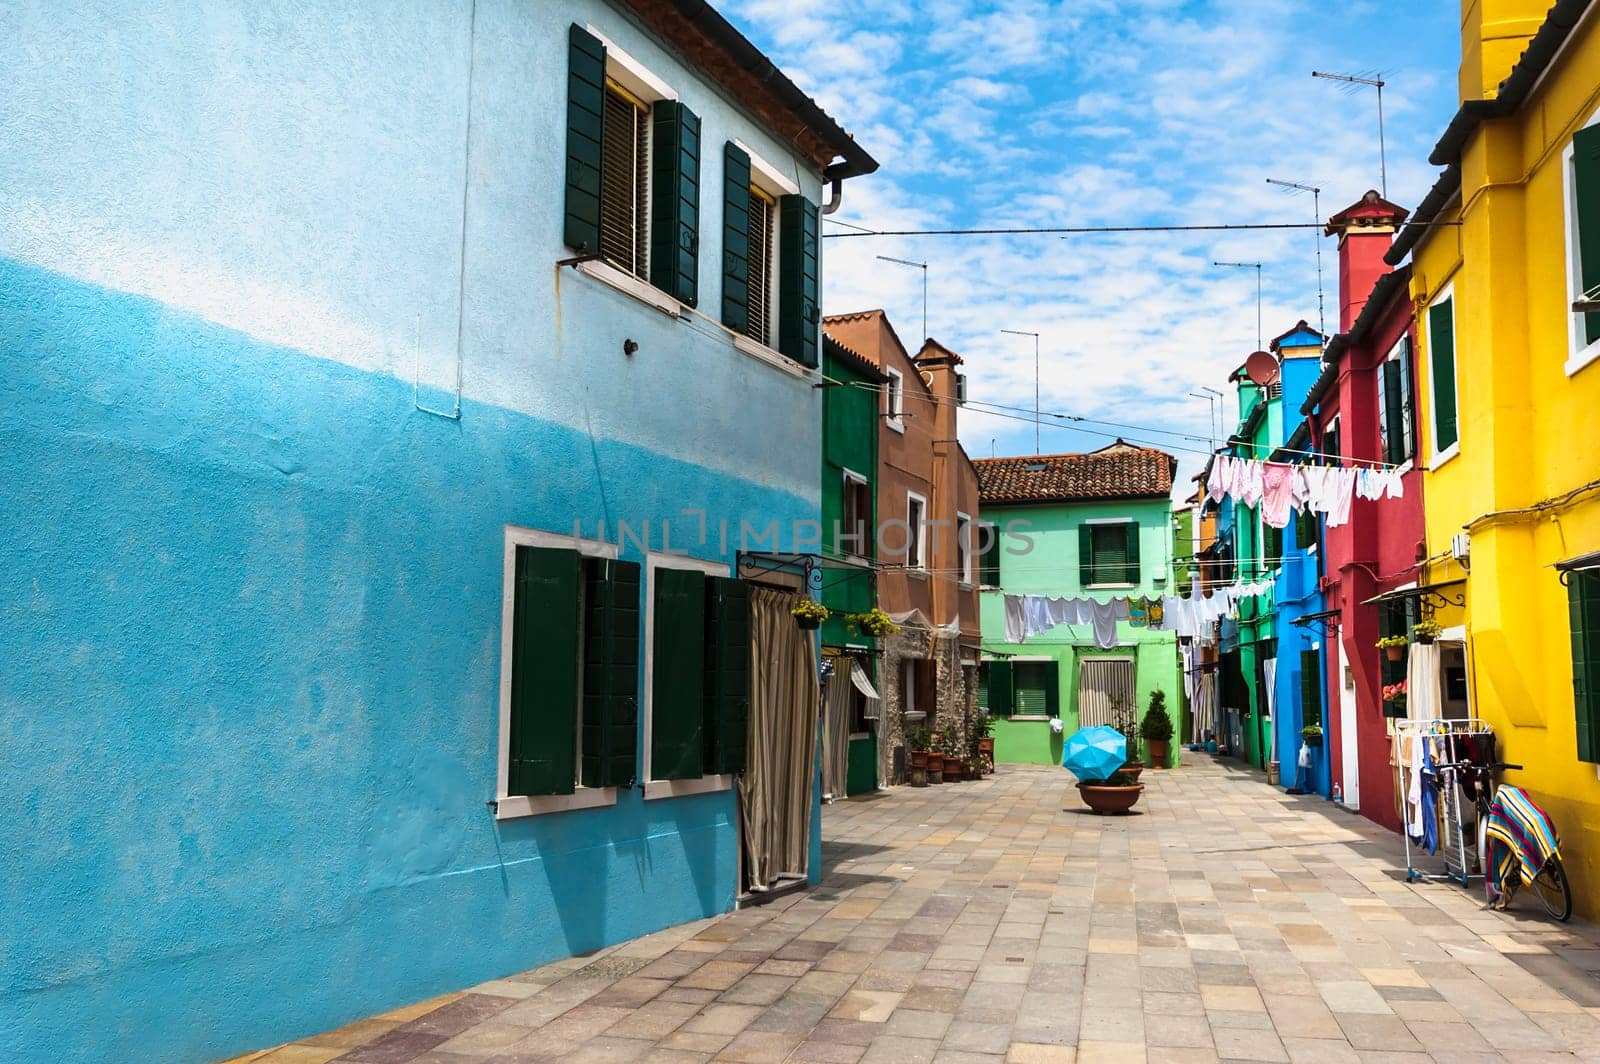 Typical houses of Burano colorful with bright colors